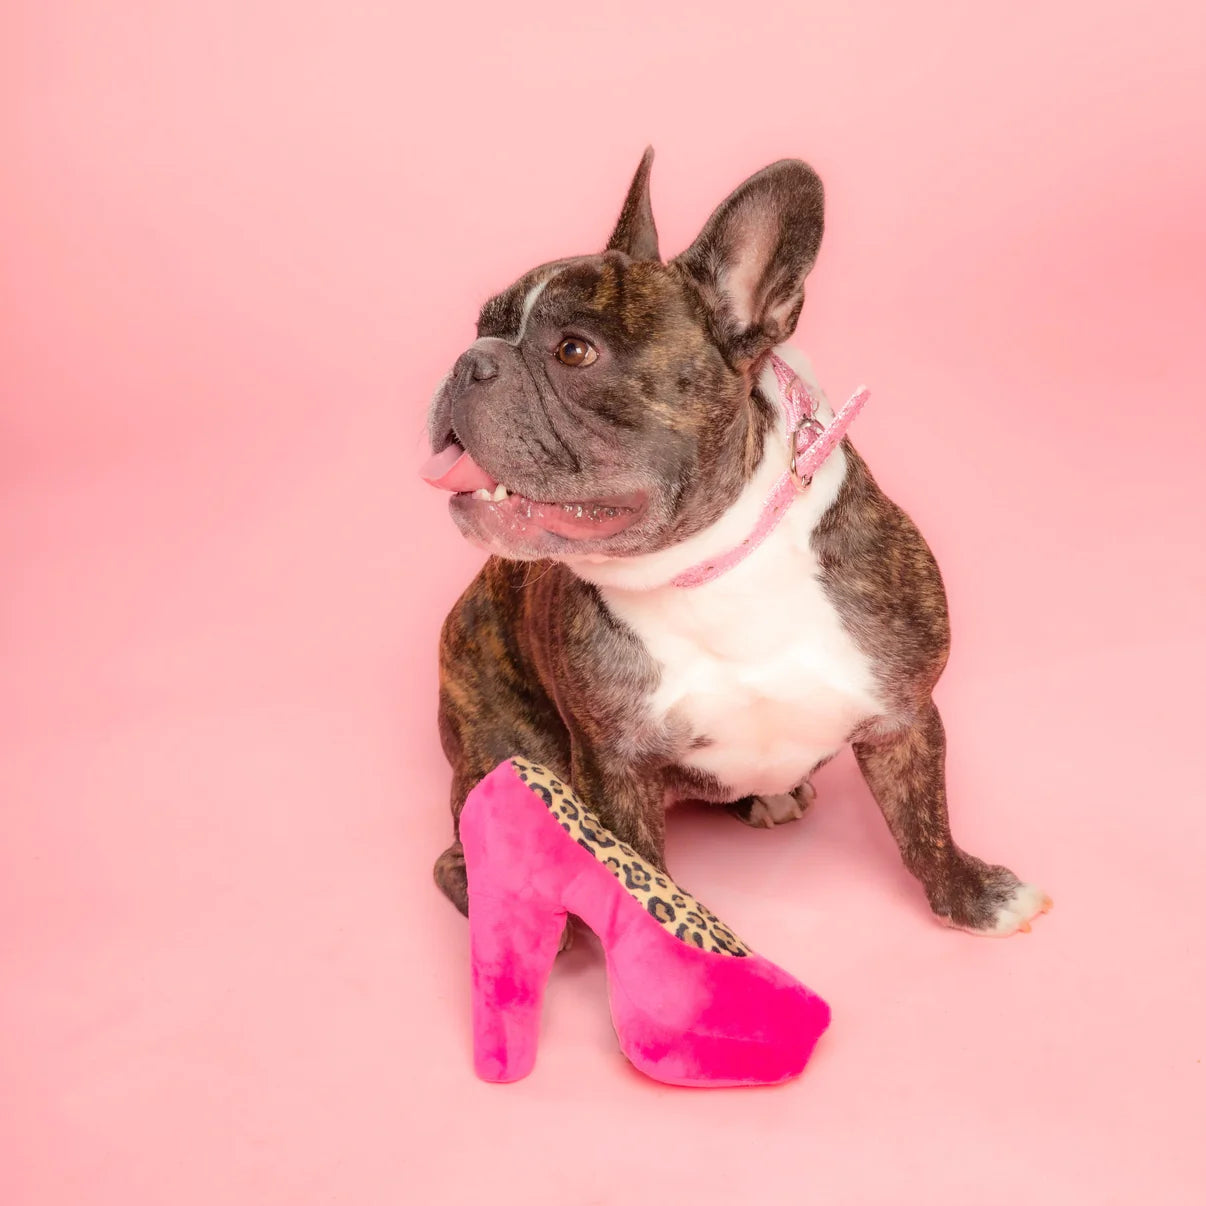 Doggy Parton - Pink Fabulous High Heel Plush Dog Squeaky Toy